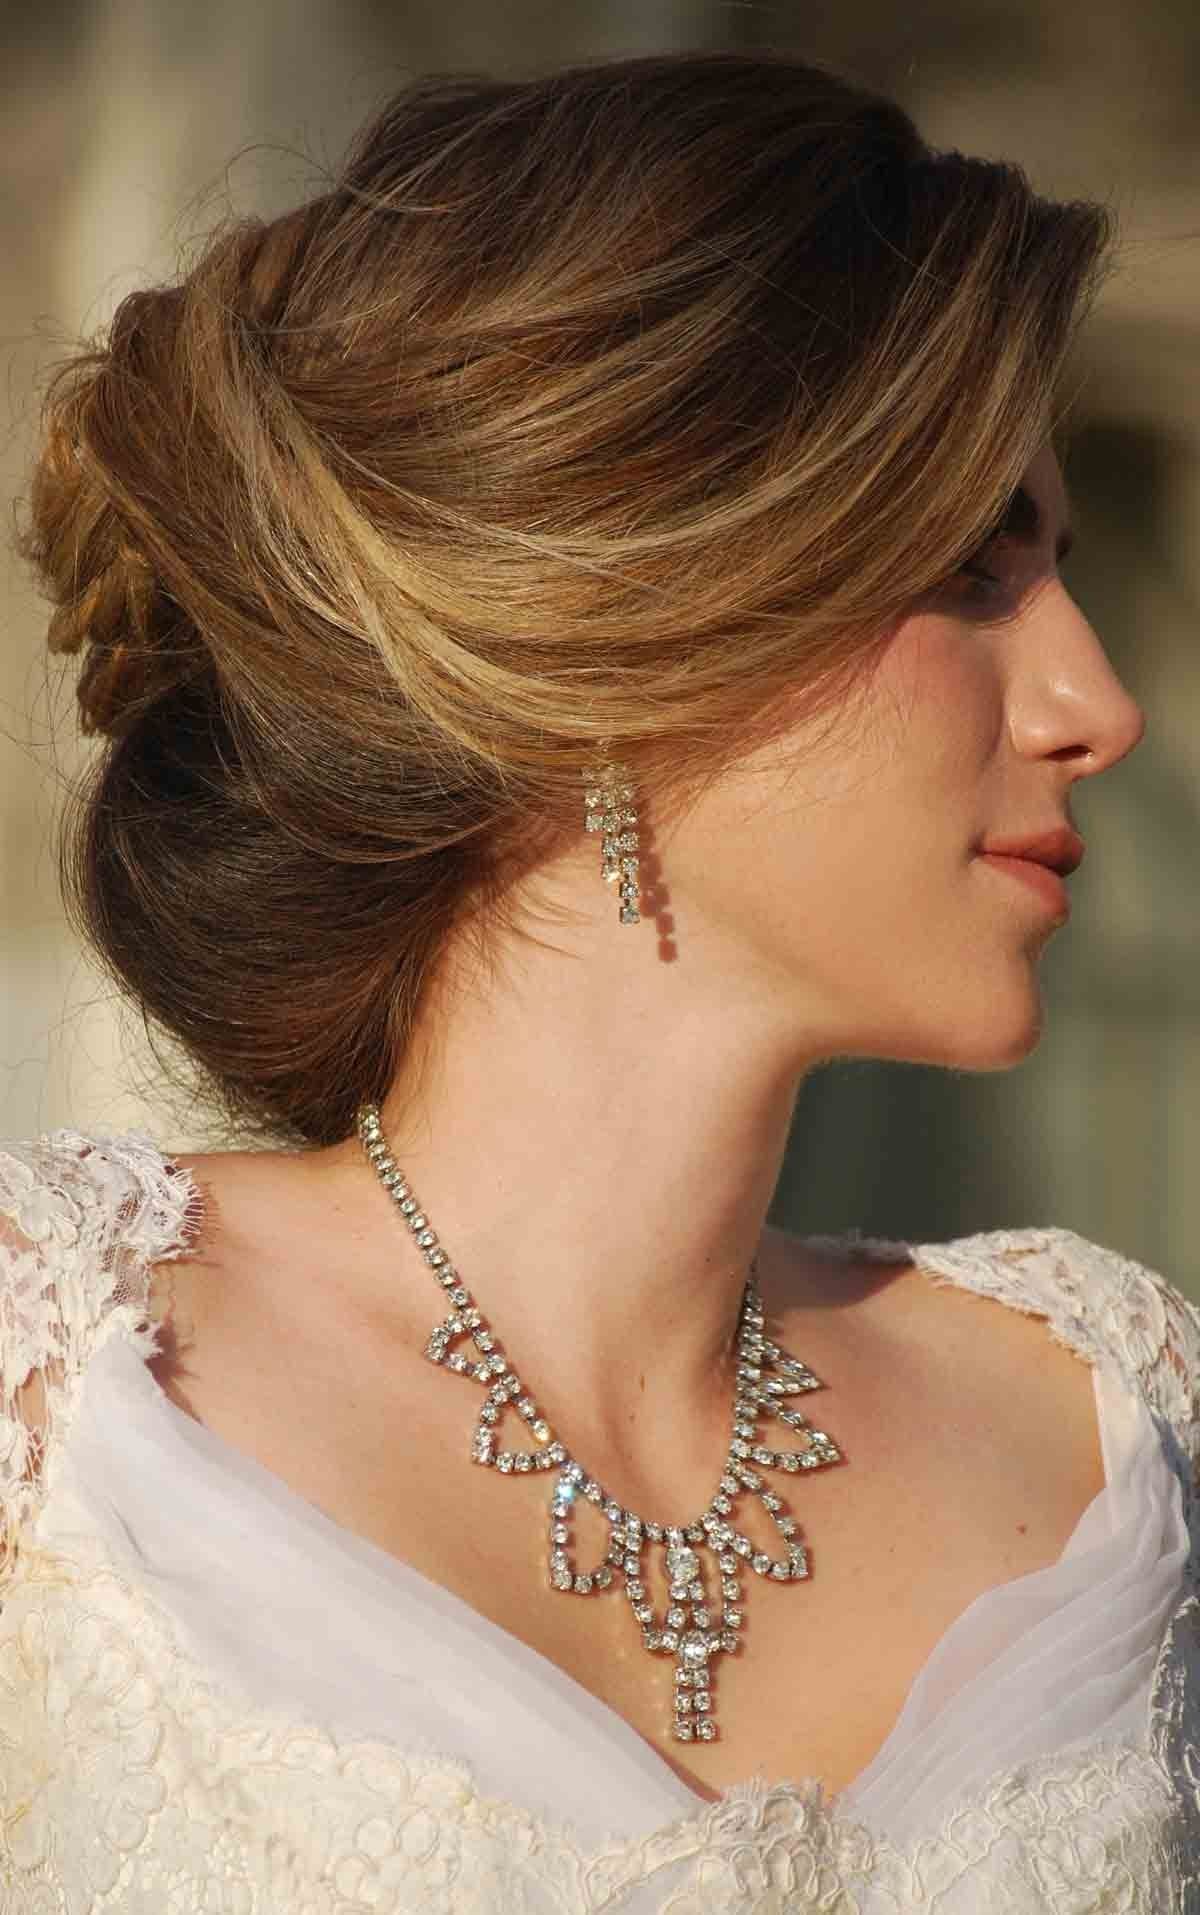 Transform Hairstyle For Bride With Round Face About Hair Styles For Intended For Current Wedding Hairstyles For Long Hair With Round Face (View 11 of 15)